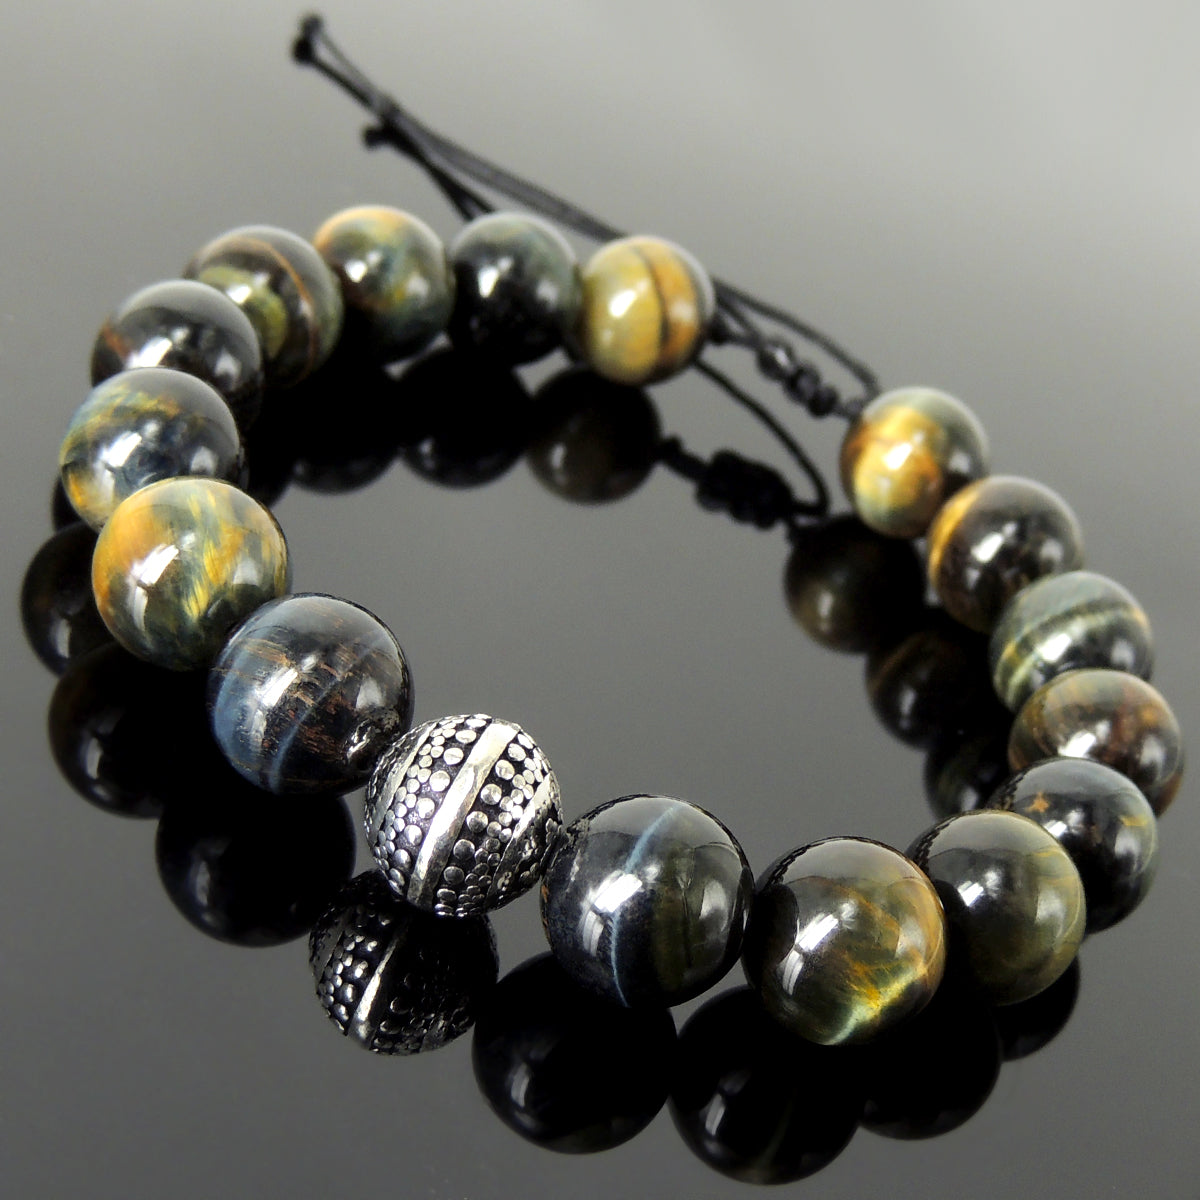 Healing Energy Gemstone Jewelry - Men's Women's Handmade Braided Bracelet Protection, Casual Wear with 12mm Brown Blue Tiger Eye, Adjustable Drawstring, S925 Sterling Silver Charm Bead BR1738